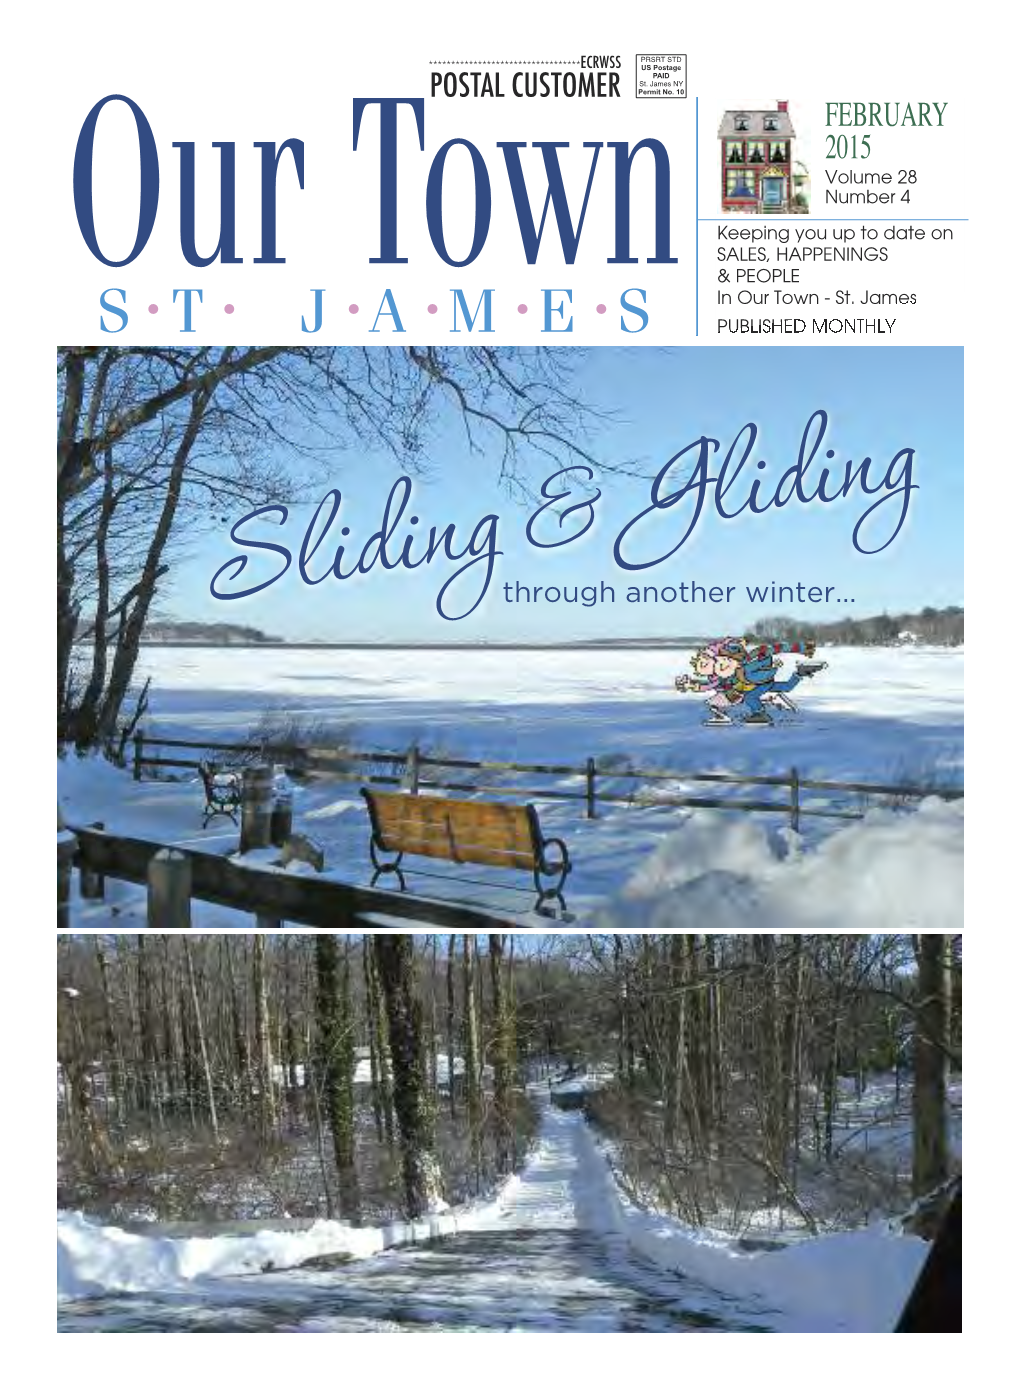 February 2015 Volume 28 Number 4 Keeping You up to Date on SALES, HAPPENINGS Our Town & PEOPLE • • • • • • in Our Town - St